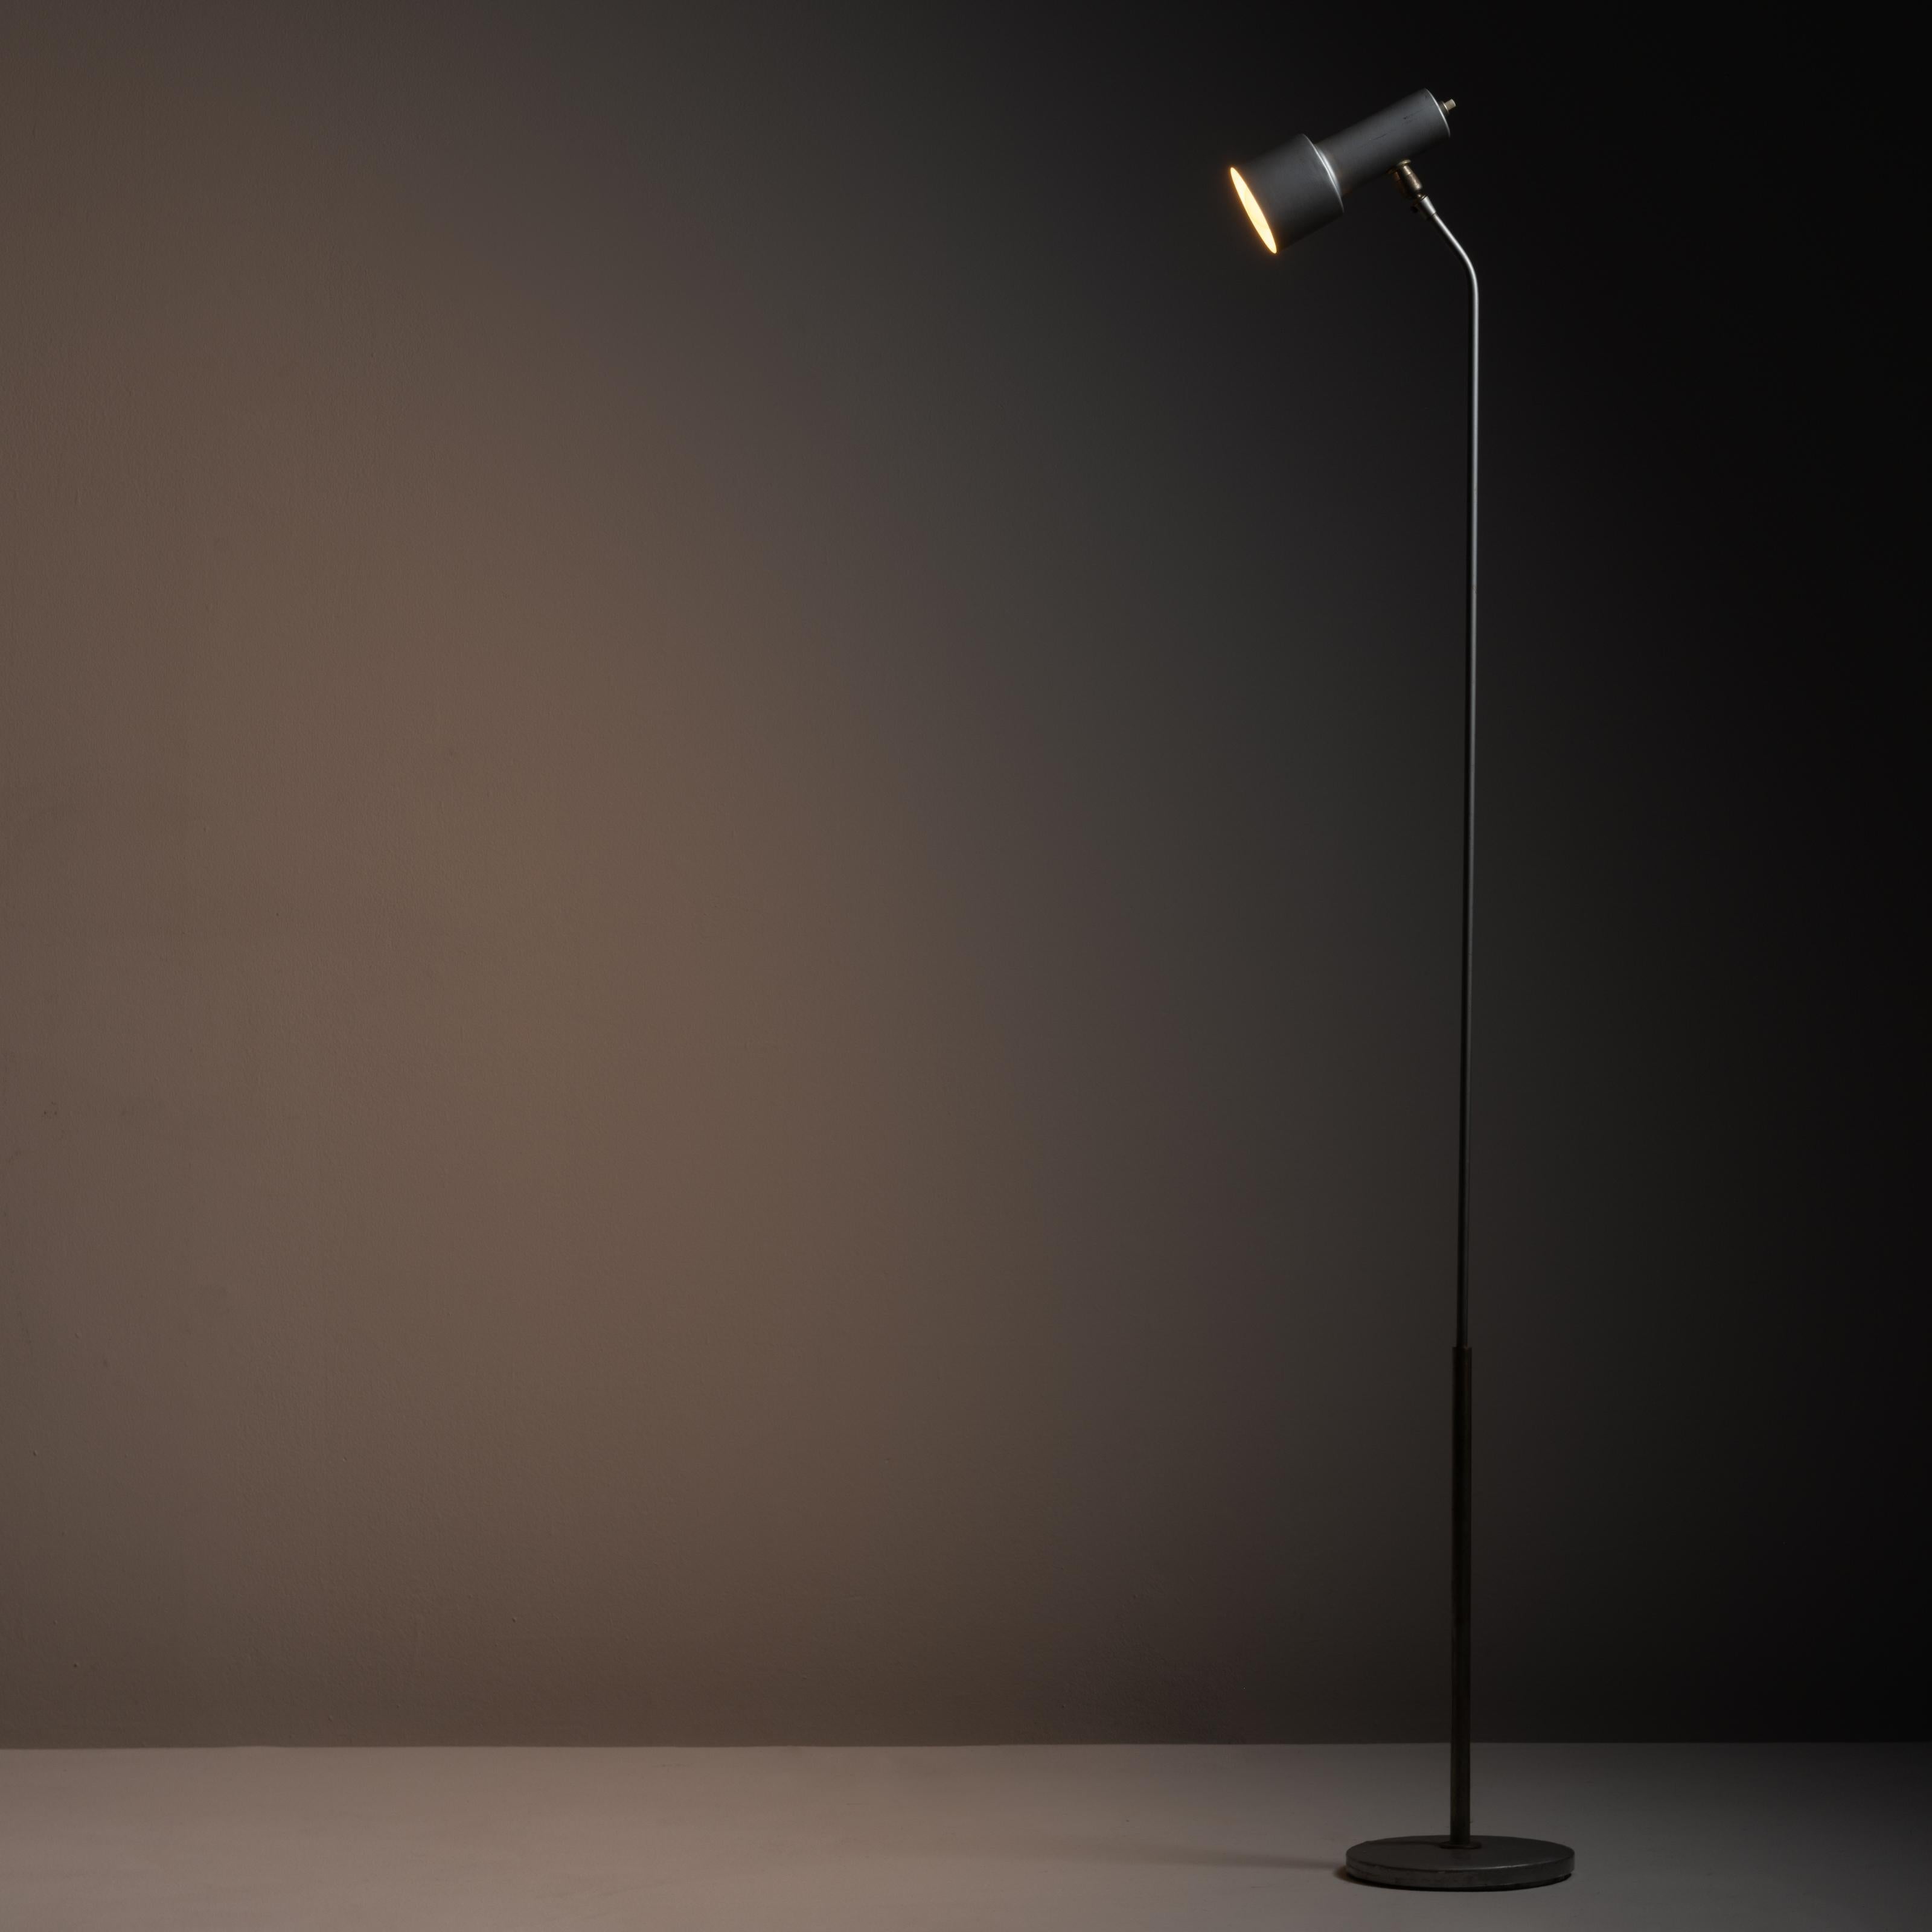 Model 1968 floor lamp by Fontana Arte. Designed and manufactured in Italy, circa the 1060s. Slender metal frame floor lamp sits on a cast iron shrink lacquered base. The shade can be adjusted with the ball joint hardware attached to shade. Push